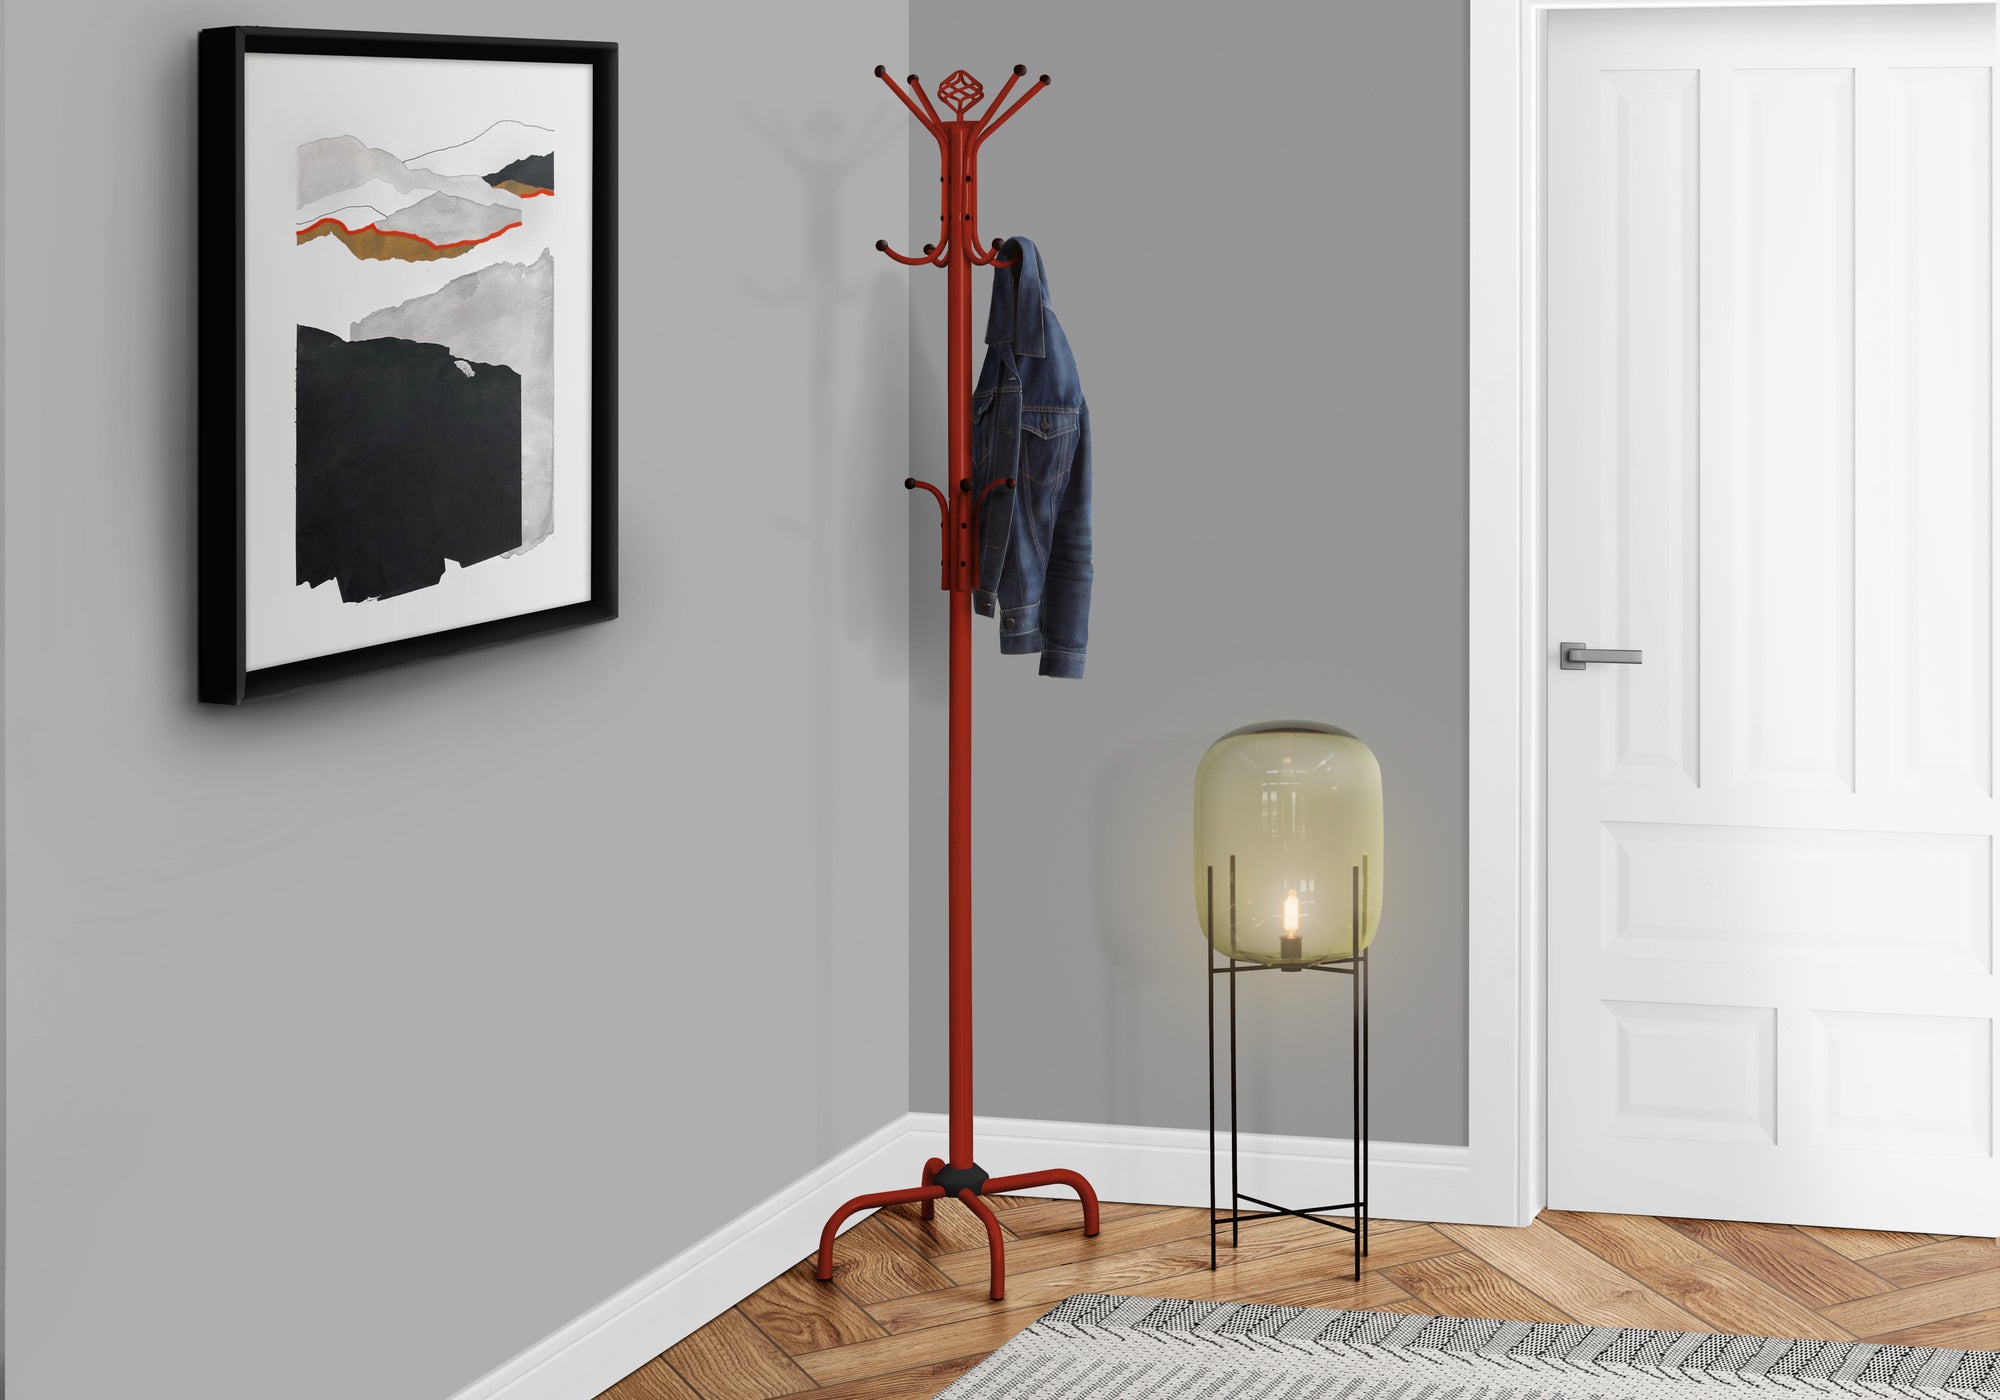 MN-512008    Coat Rack, Hall Tree, Free Standing, 12 Hooks, Entryway, 70"H, Metal, Red, Contemporary, Modern